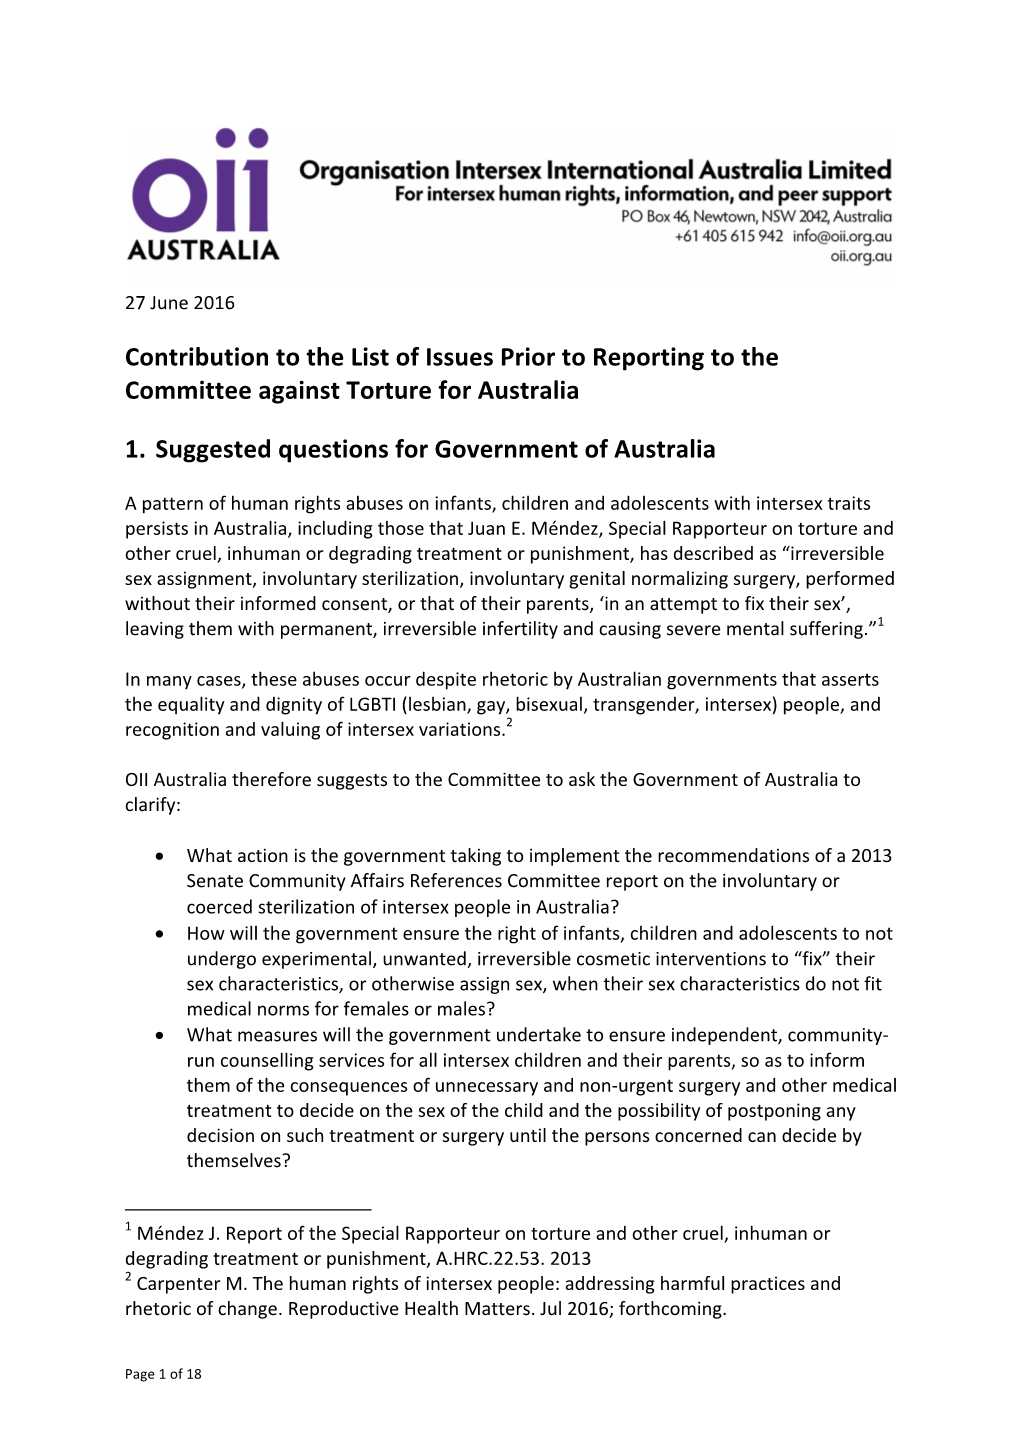 Contribution to the List of Issues Prior to Reporting to the Committee Against Torture for Australia 1. Suggested Questions Fo